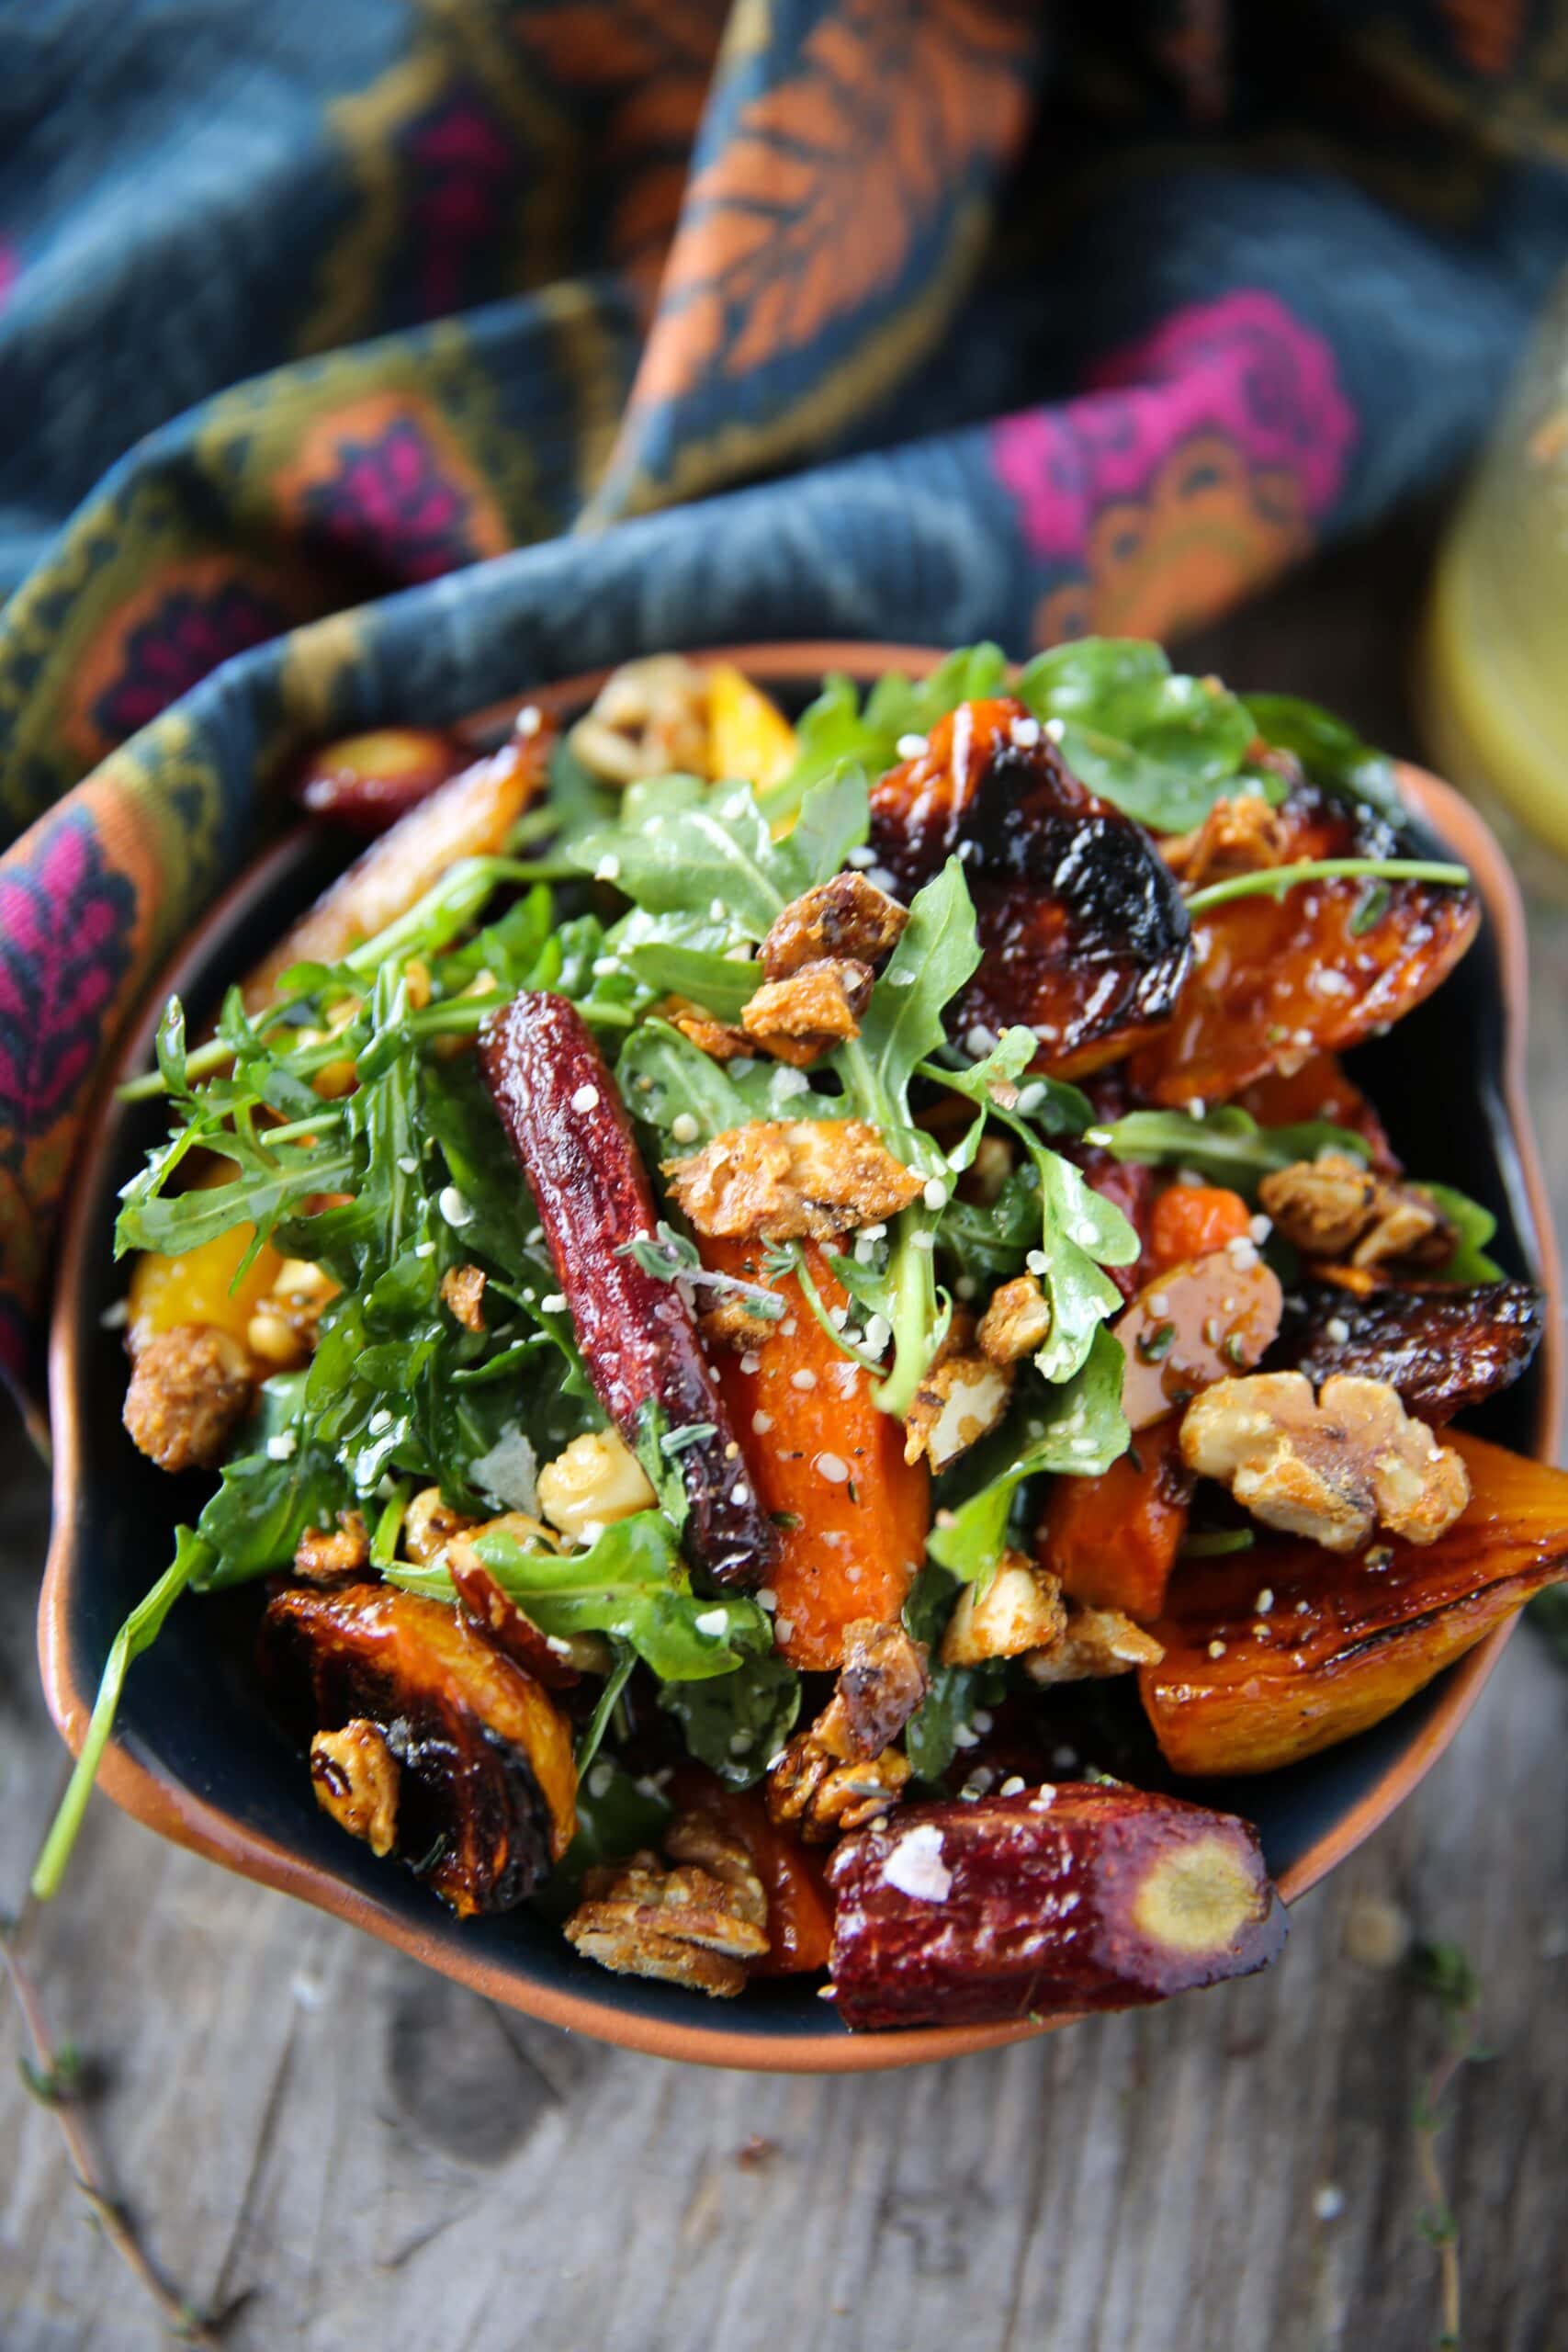 Bowl of homemade Roasted Beet & Carrot Salad with almonds. walnuts and arugula